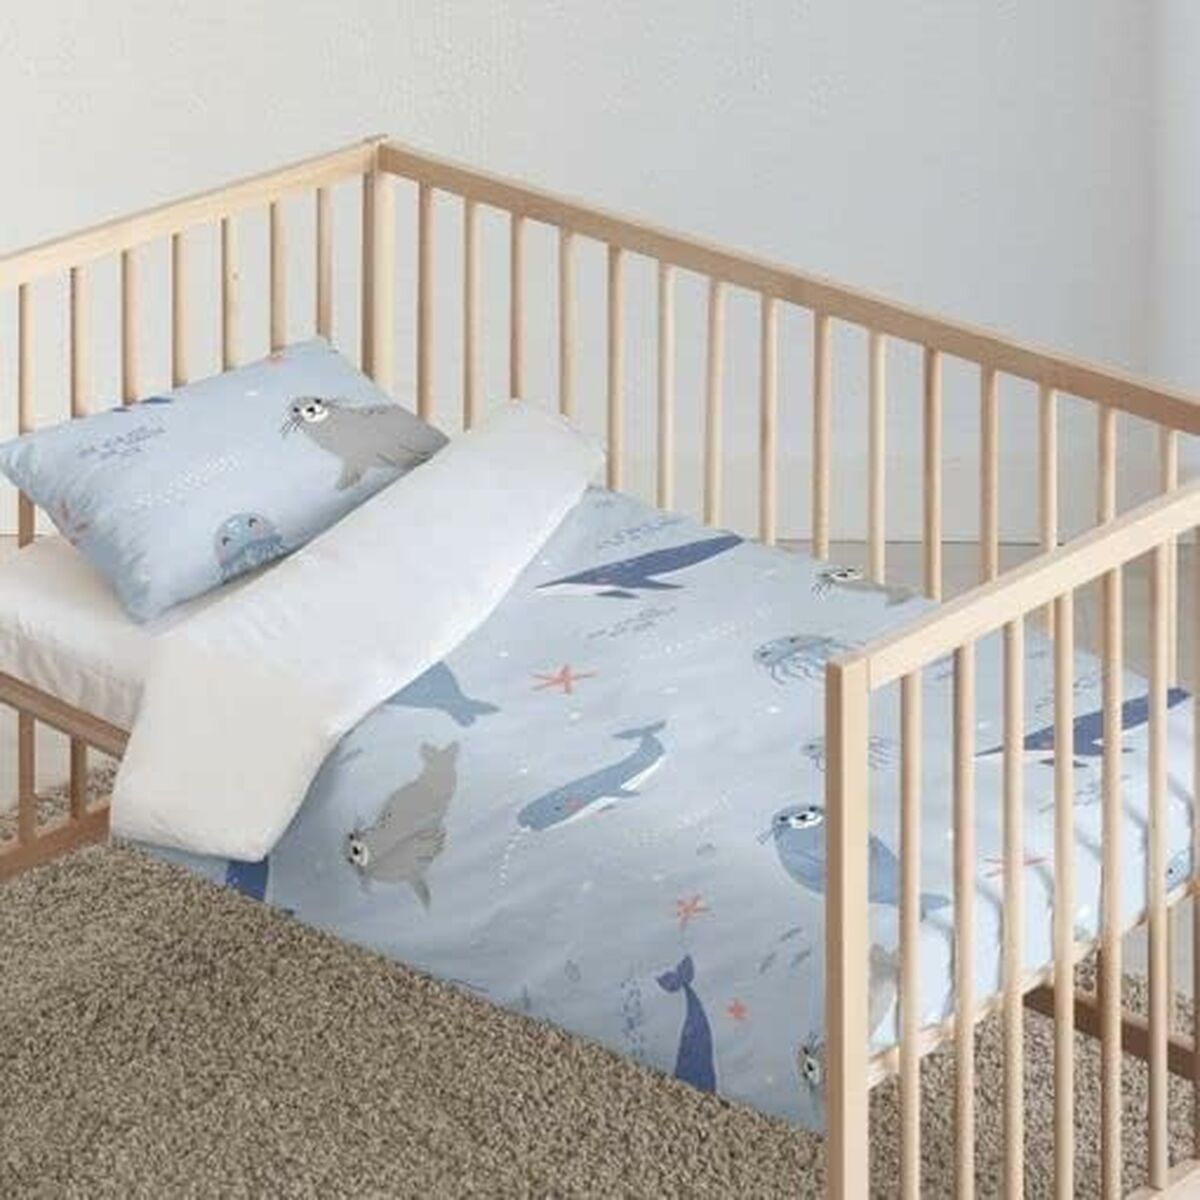 Cot Quilt Cover Kids&Cotton Tabor Small 115 x 145 cm